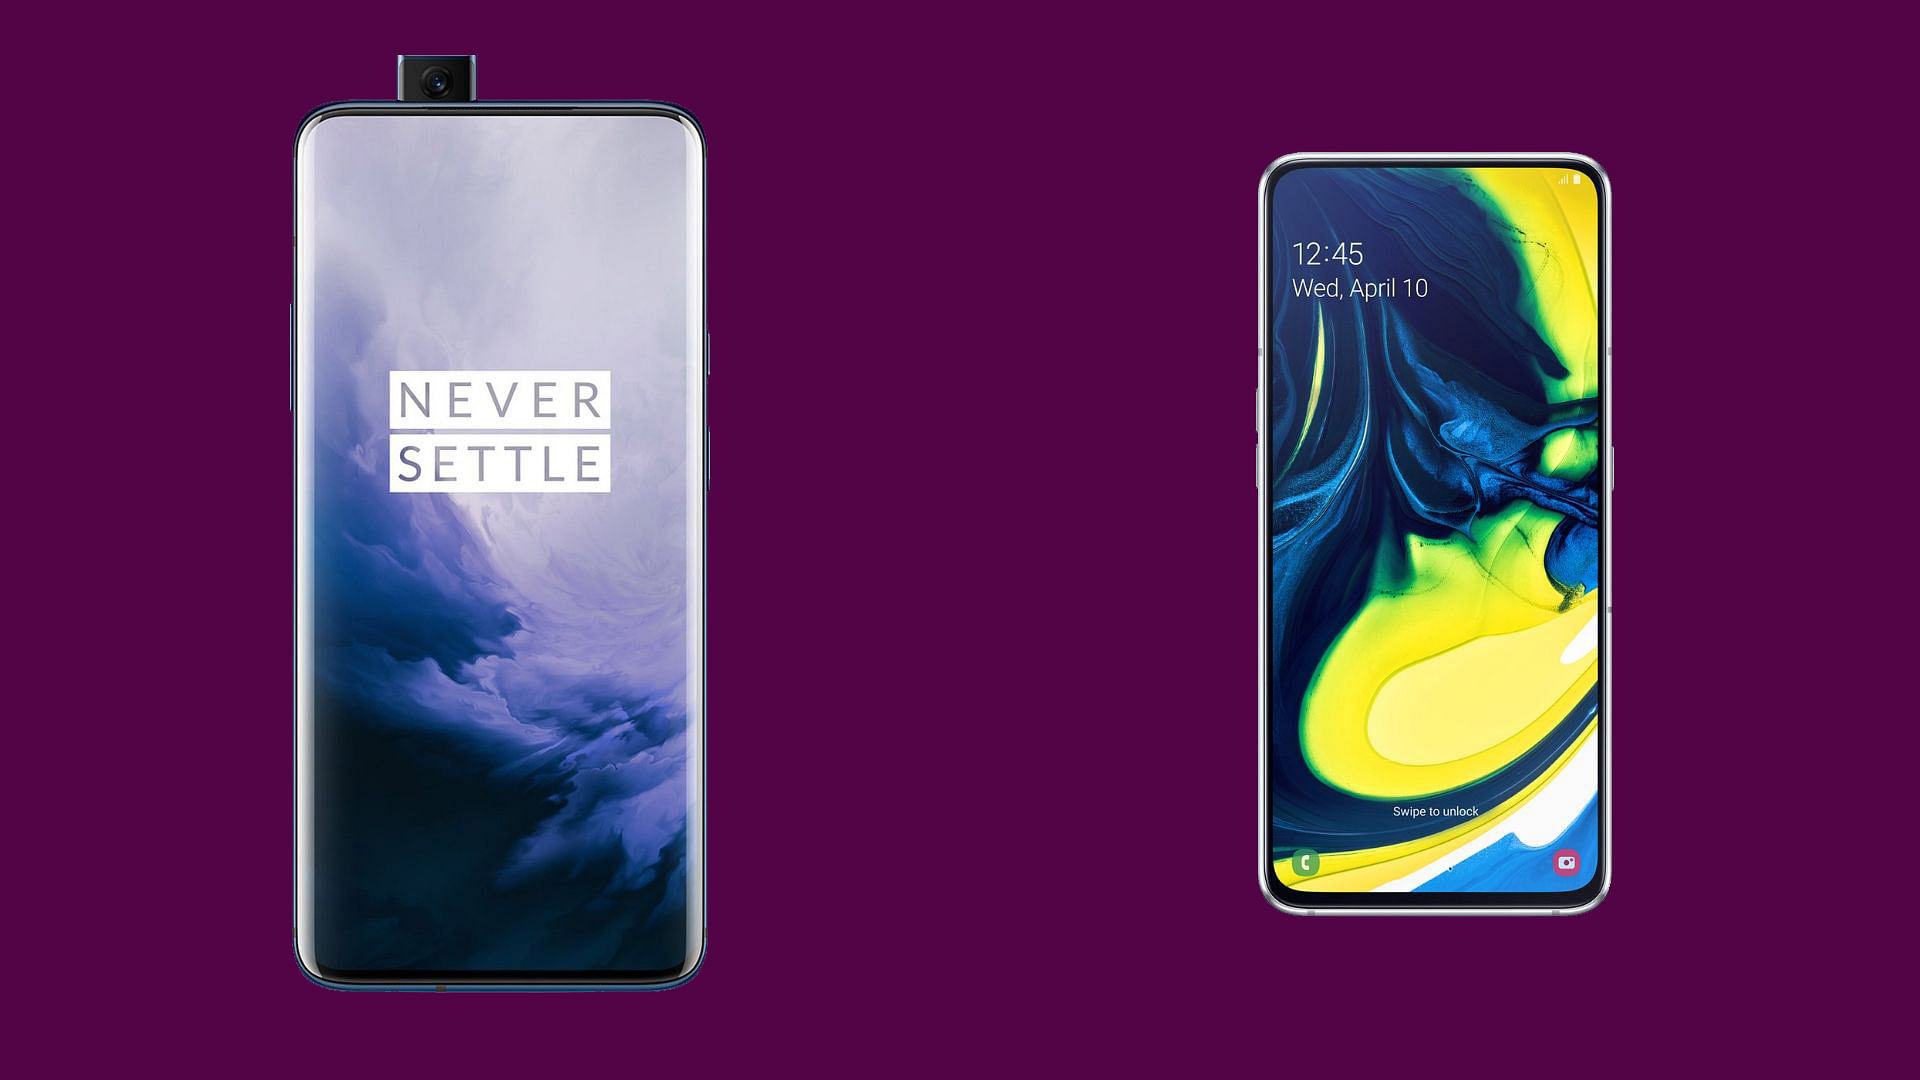 OnePlus 7 Pro (left) and Samsung Galaxy A80 (right)